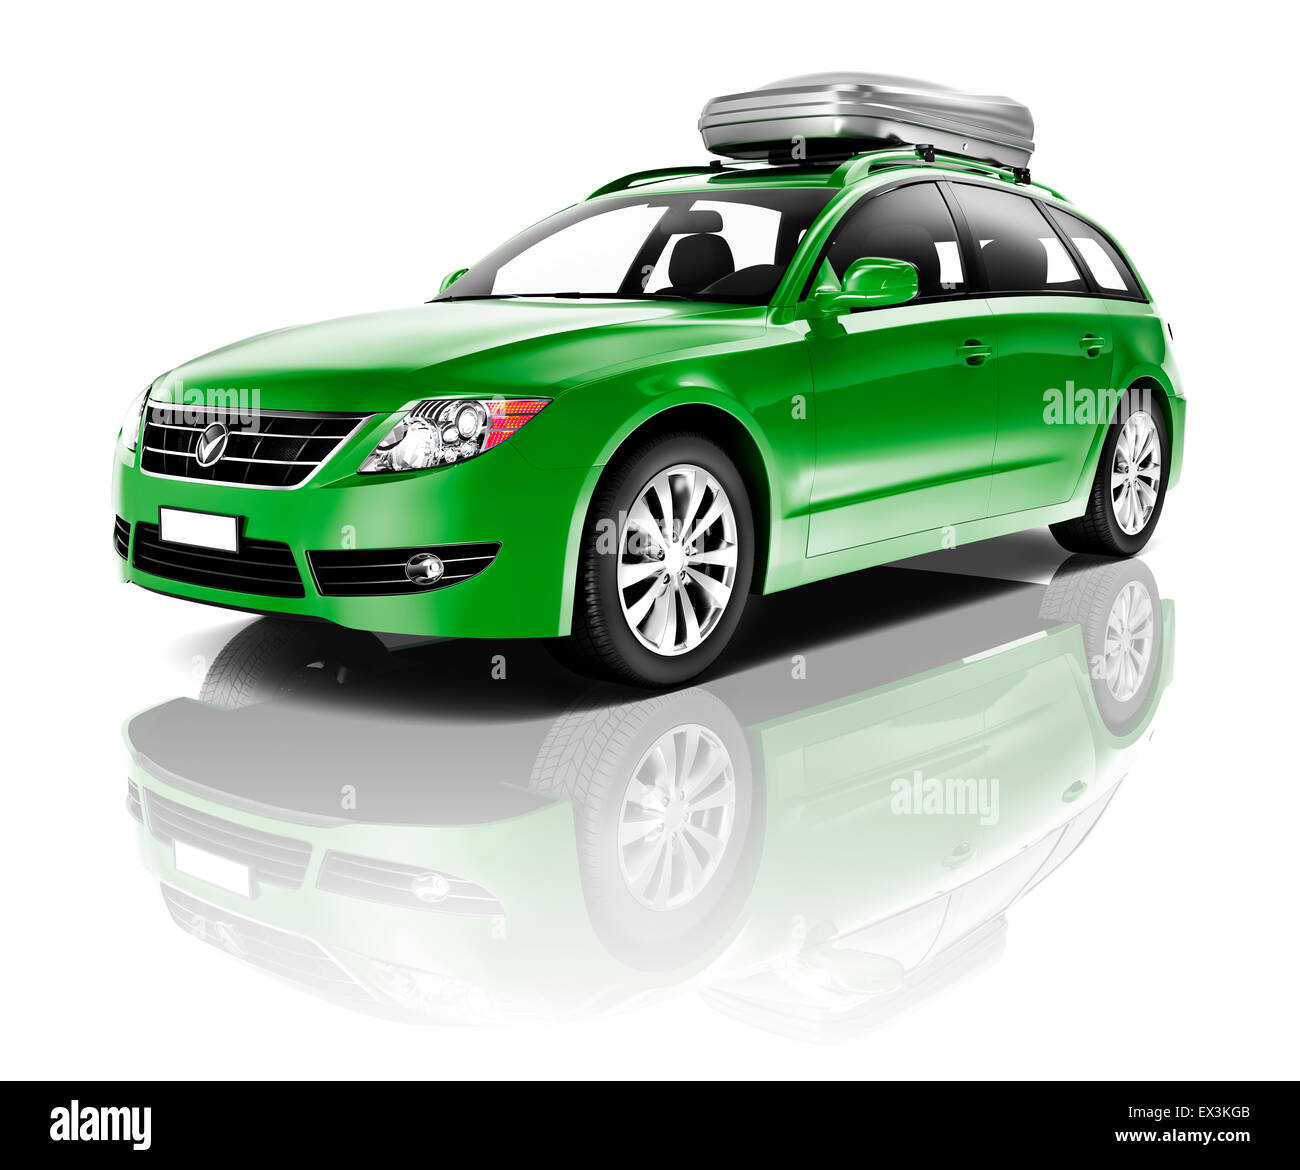 Three Dimensional Image of a Green Car Stock Photo